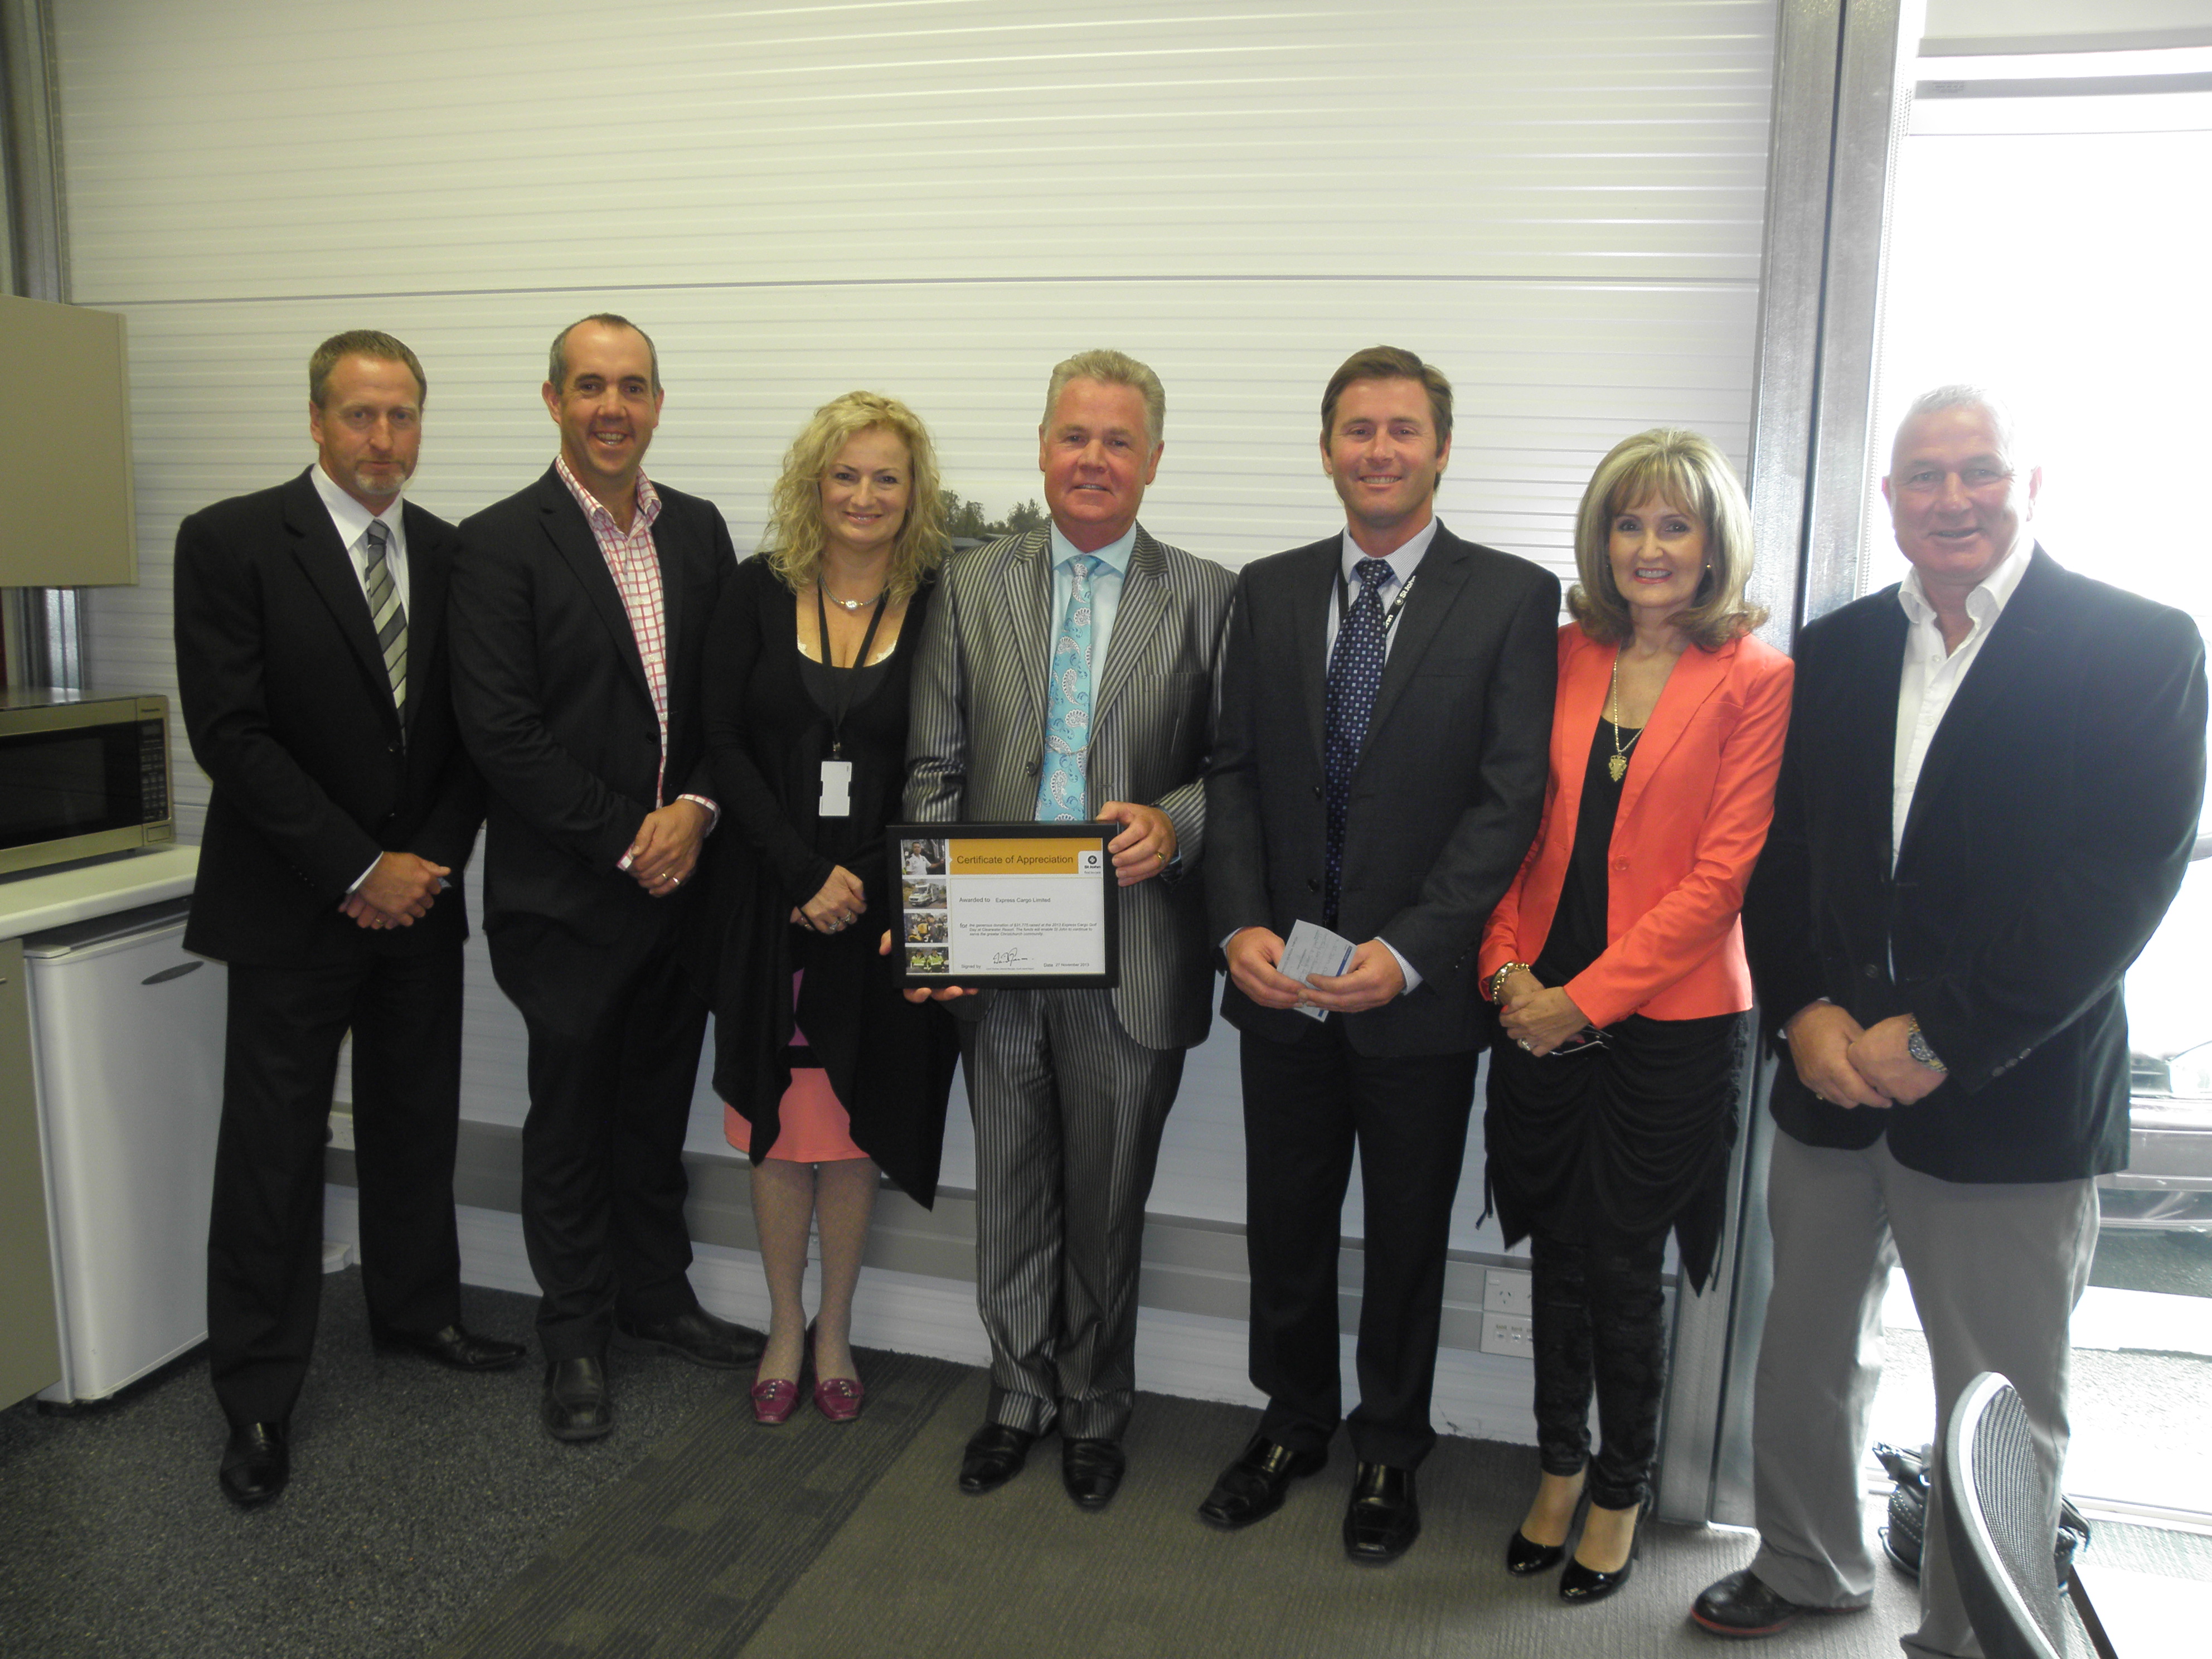 The Express Cargo team with Christine Prince (third from left) and Michael MacLachlan (third from right) of the South Island Region Customers and Services team.